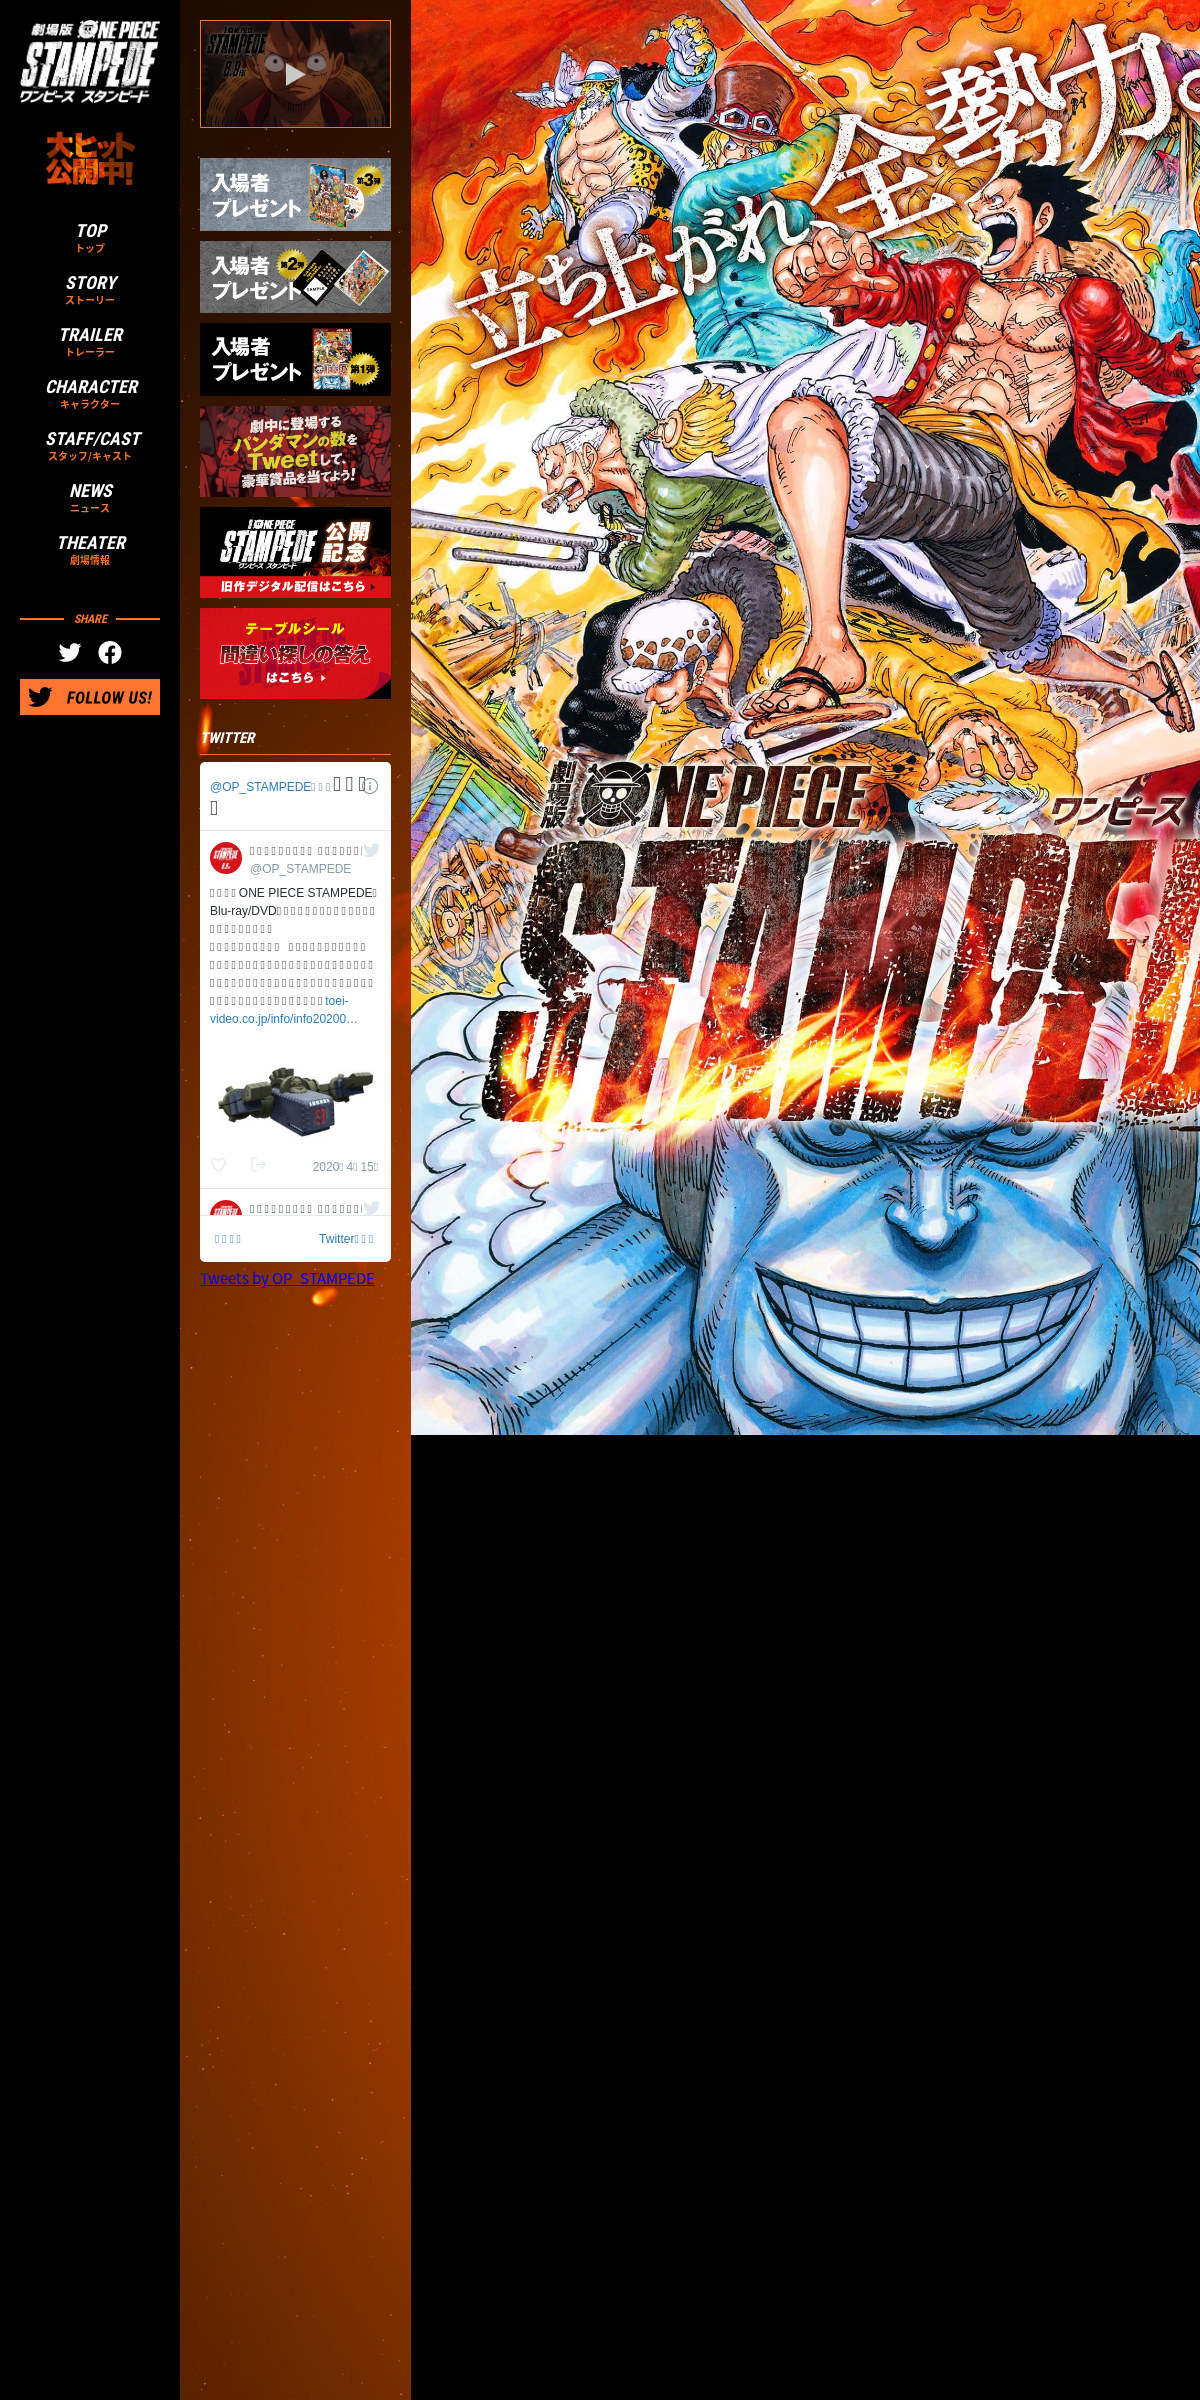 A complete backup of onepiece-movie.jp